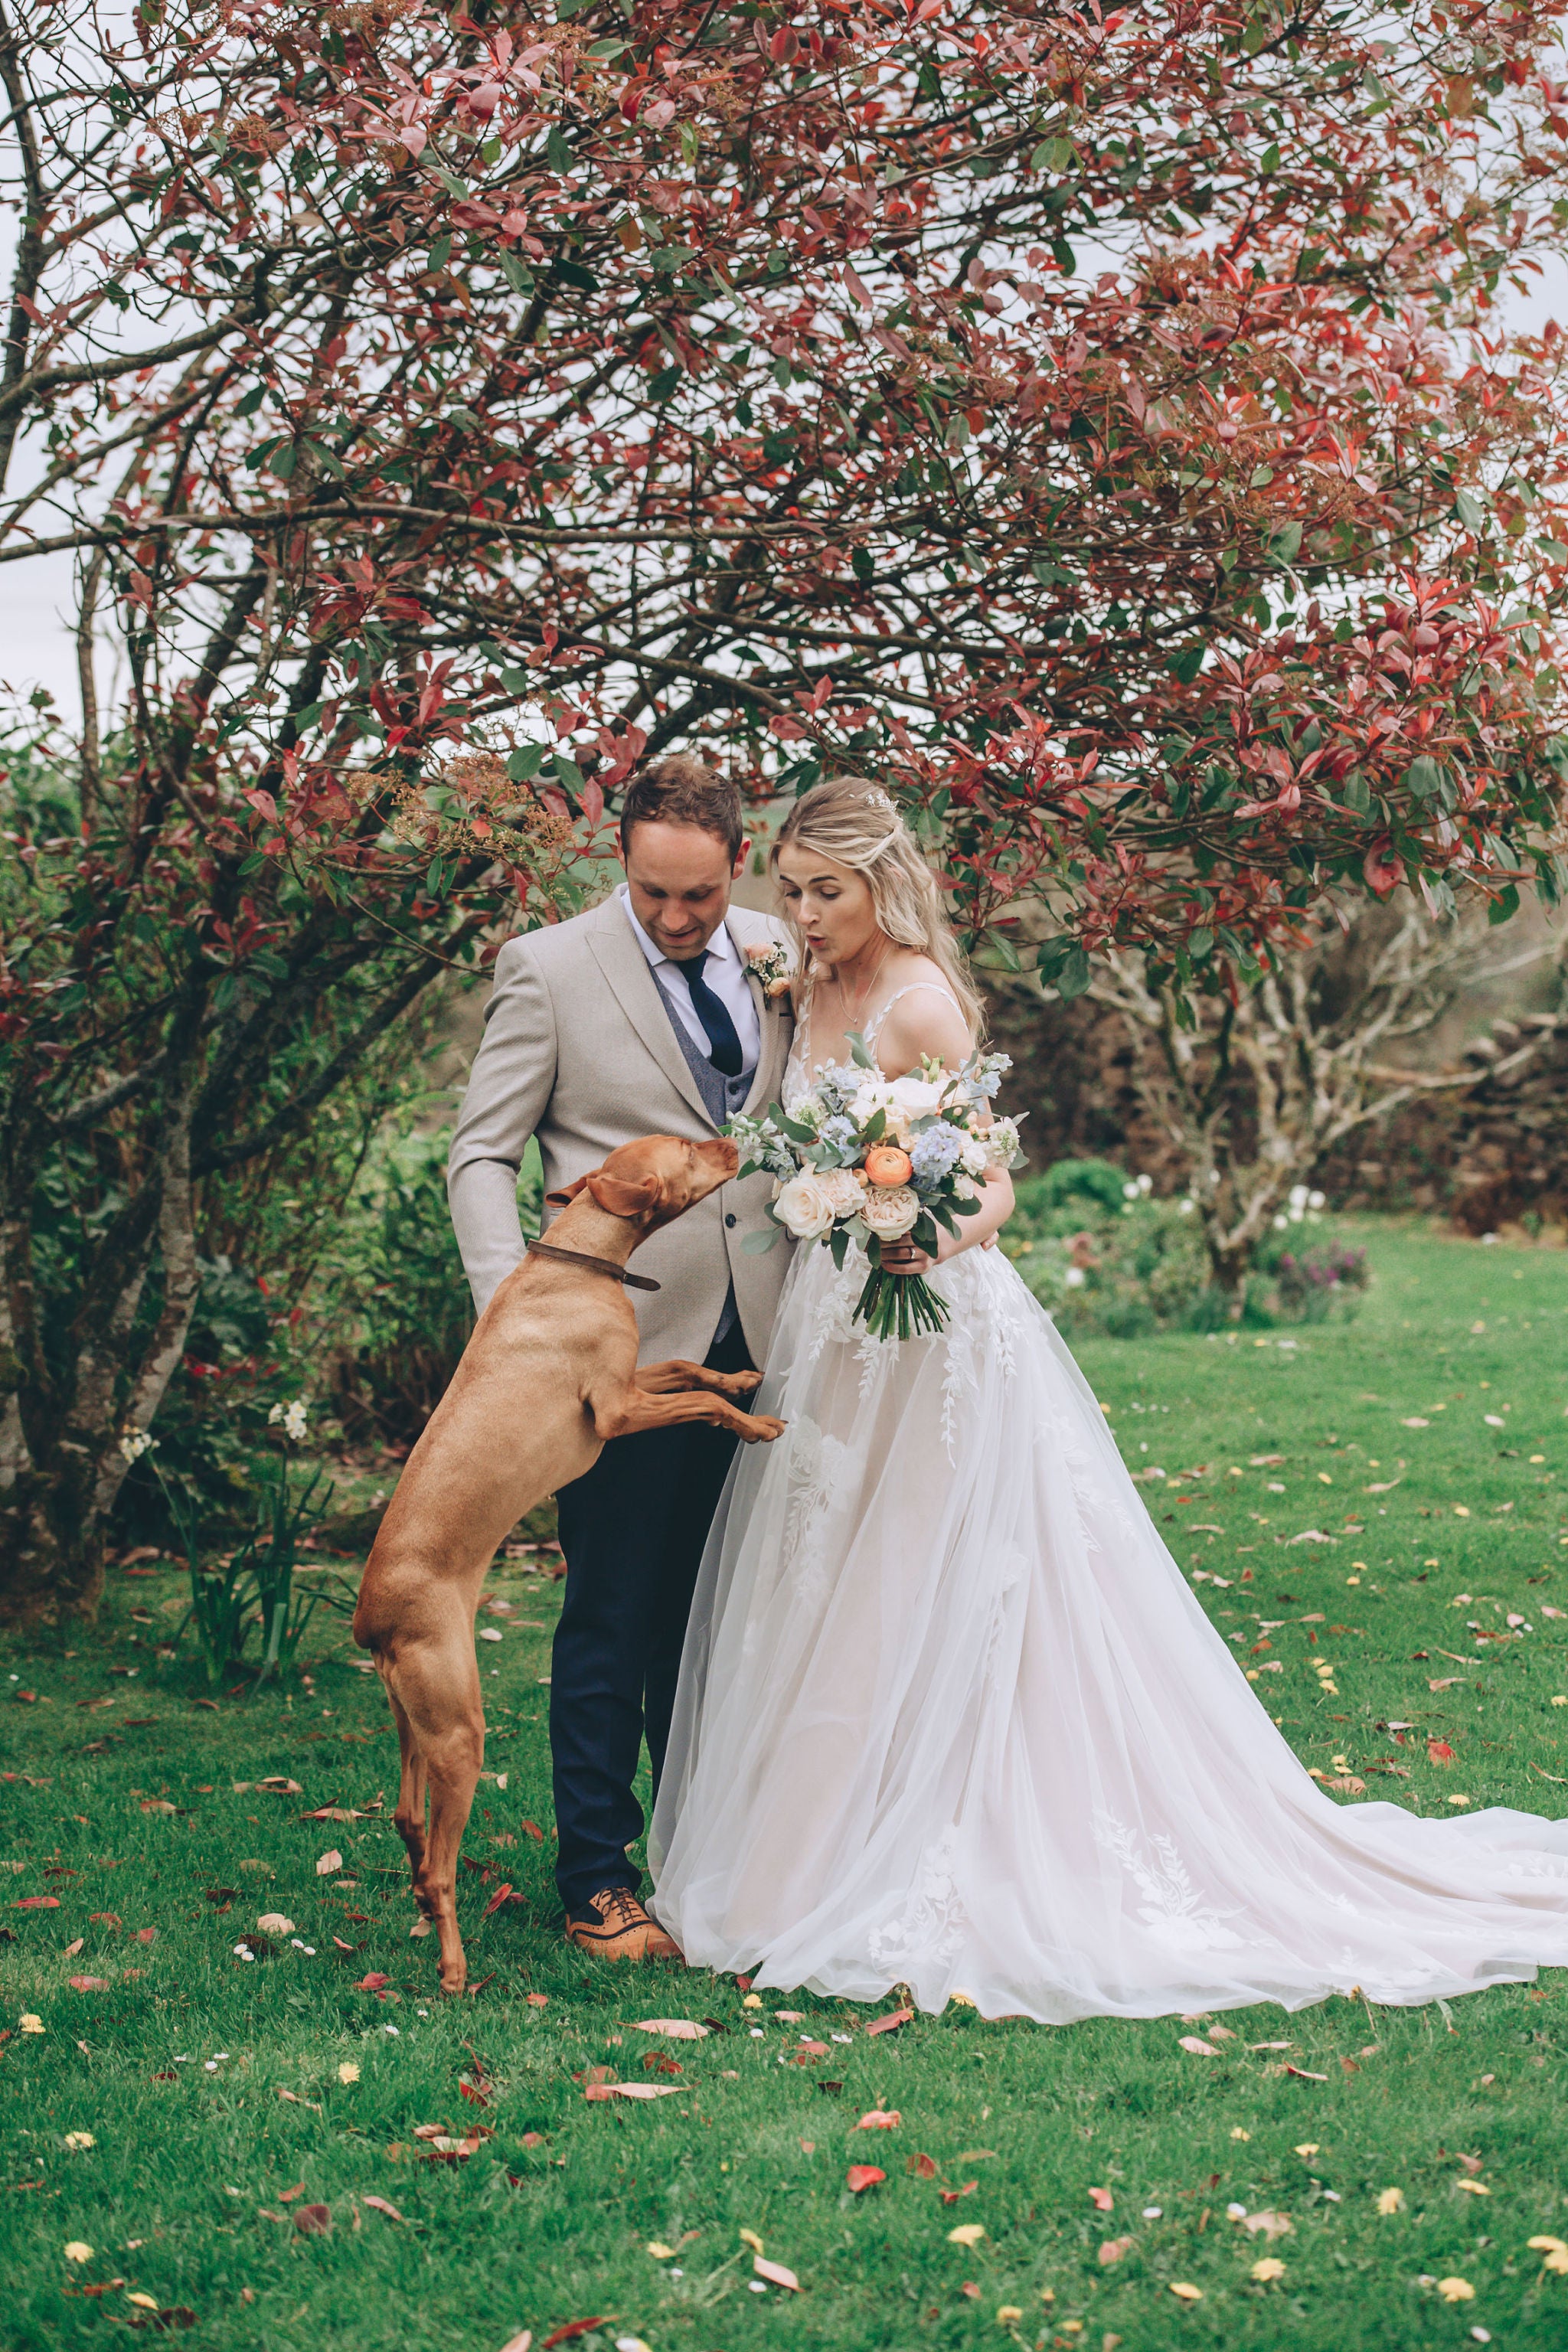 Excited dog with bride at Trevenna wedding barns